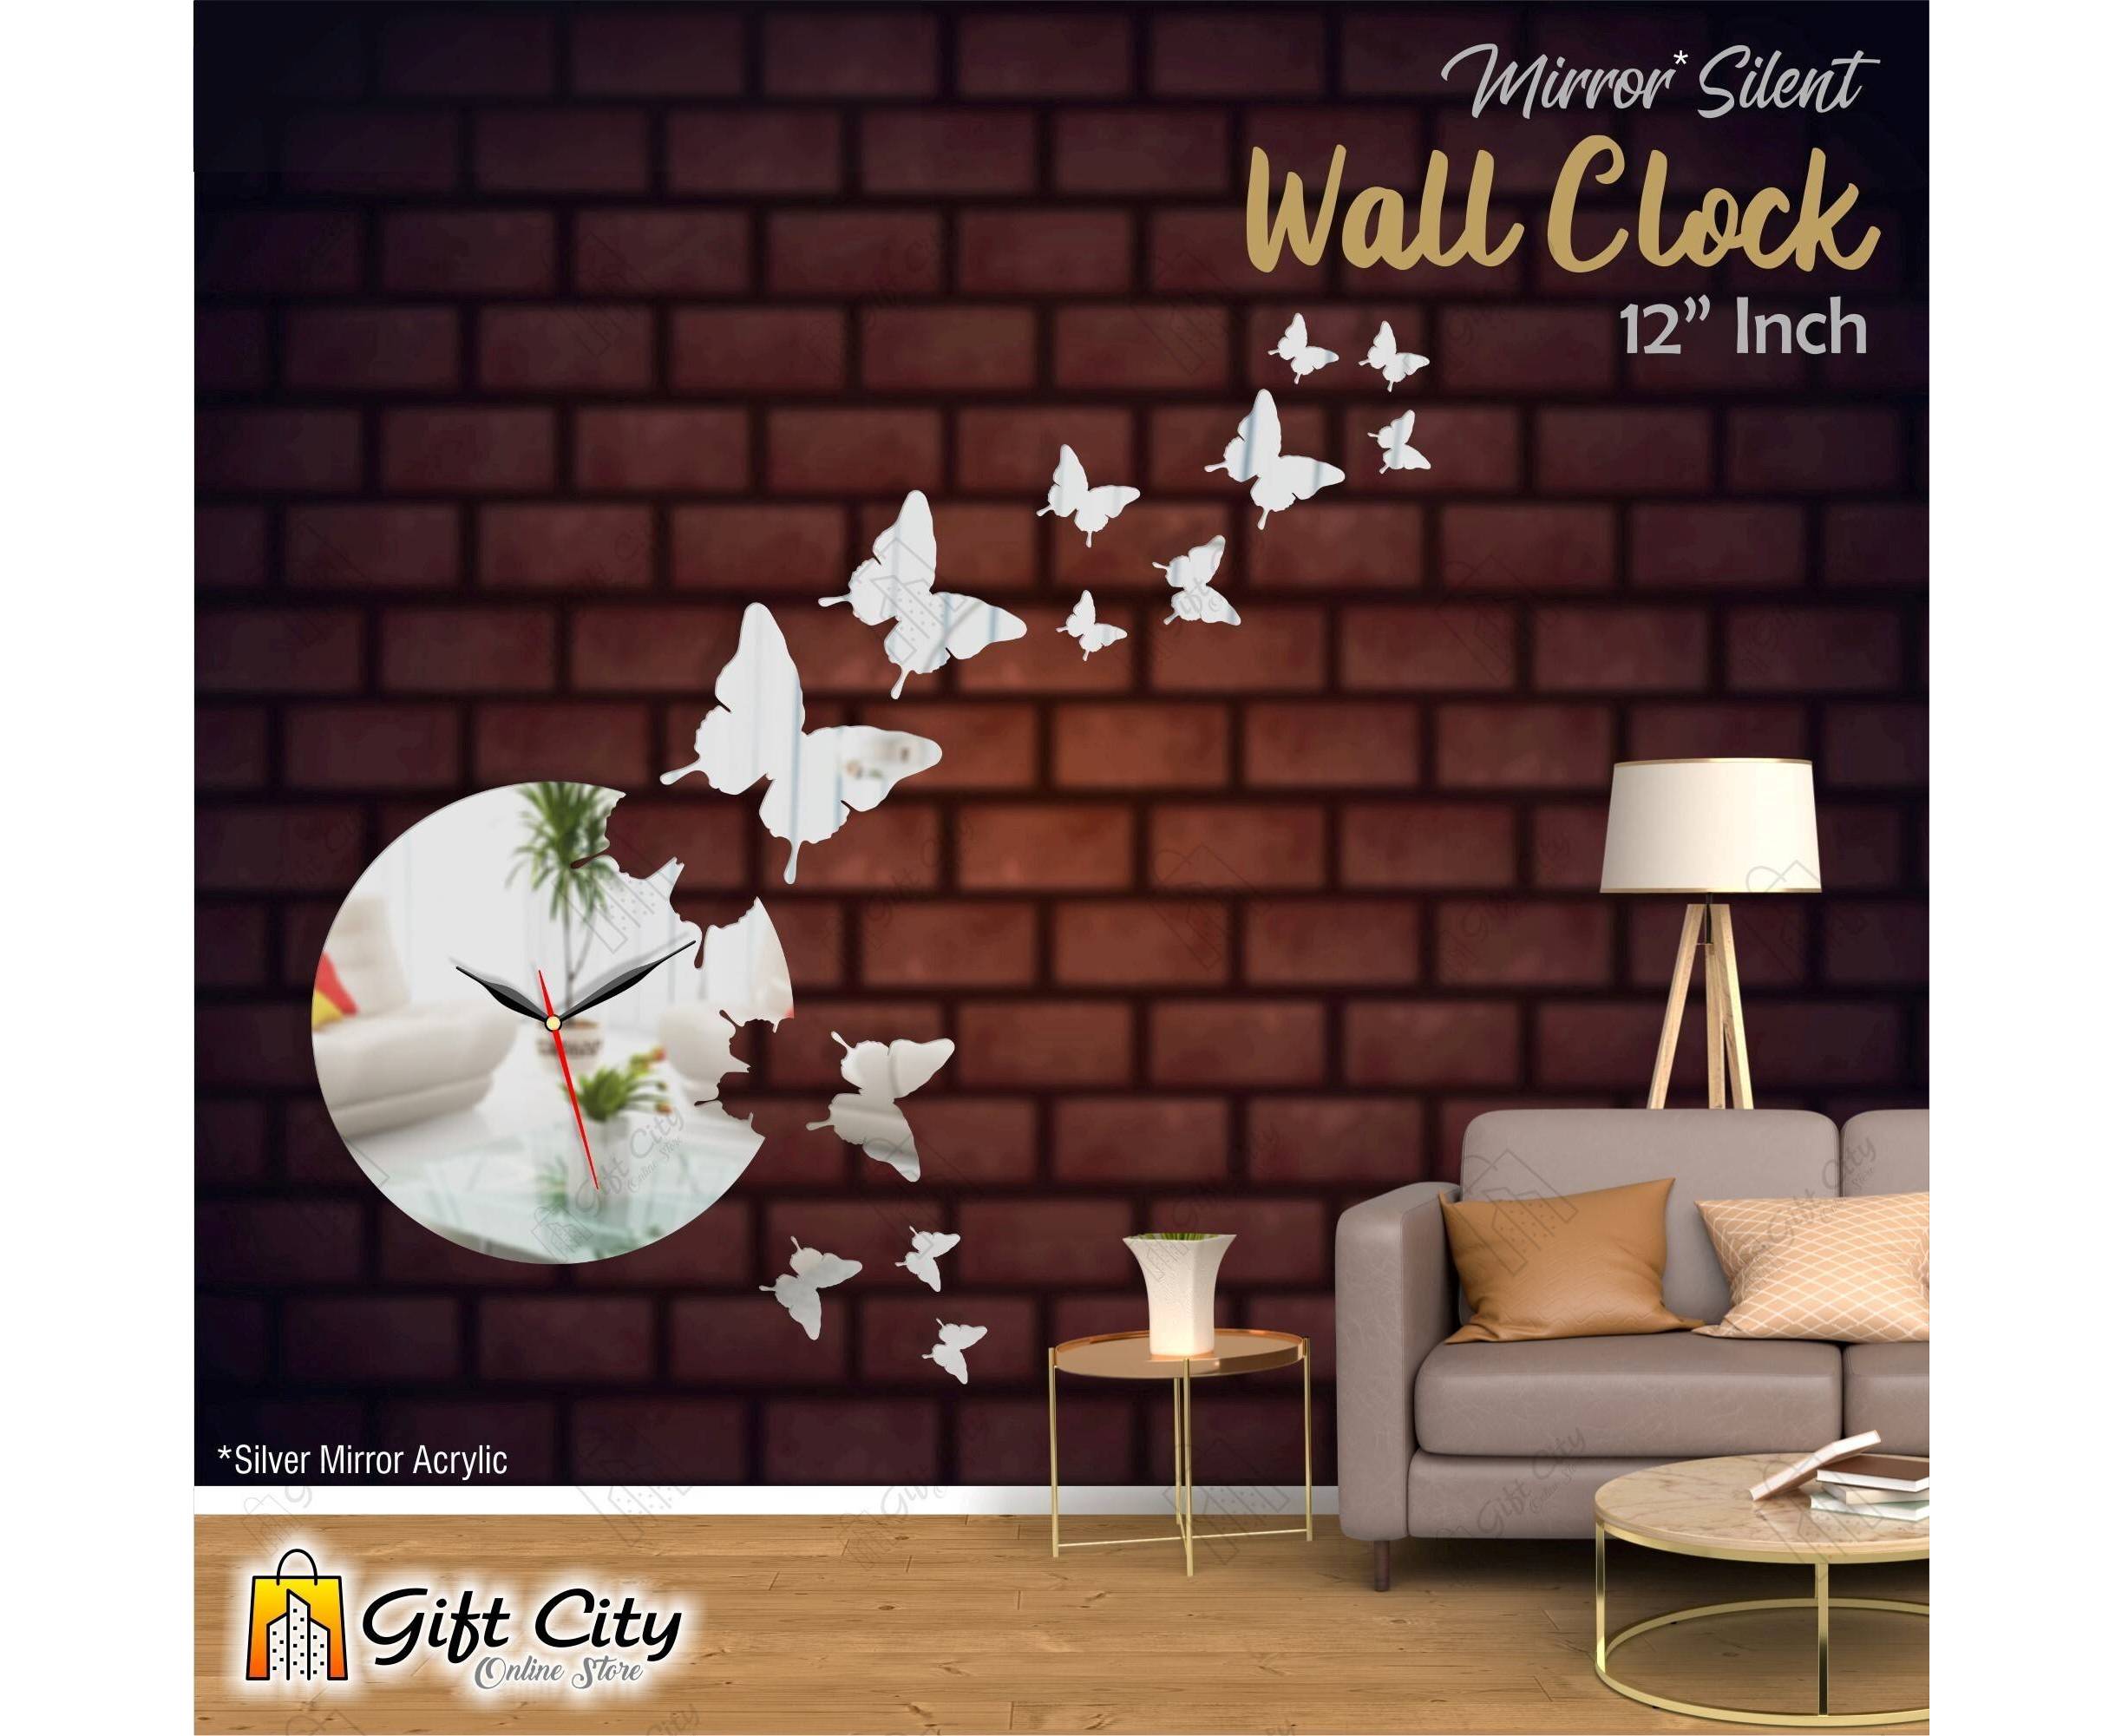 10 Best Acrylic Decorative Wall Clocks for Home